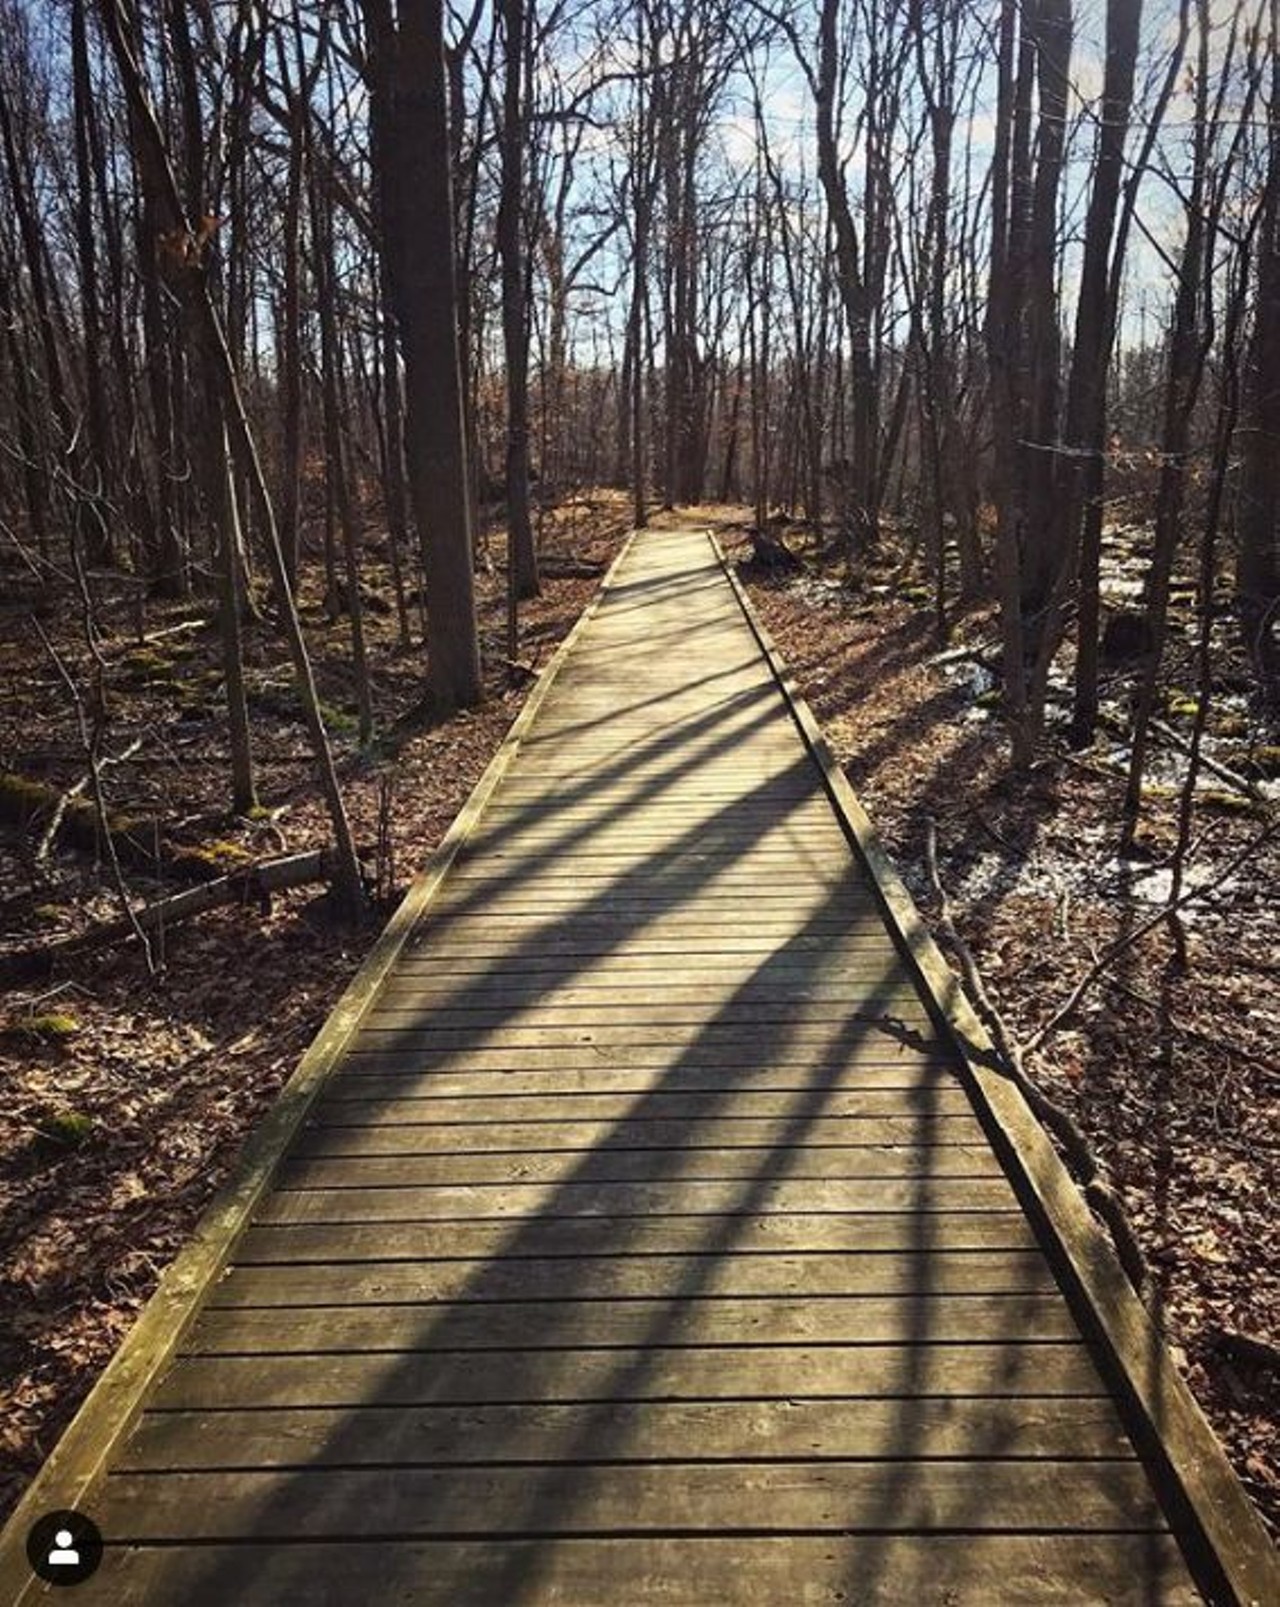 Bog Trail
Waterloo, Chelsea
One of five trails of Waterloo Recreation Area, the Bog Trail makes for the most unique hike. At 1.5 miles in length, the Bog Trail leads hikers to a floating bog in Cedar Lake.
Photo via Instagram user @peterschriemer